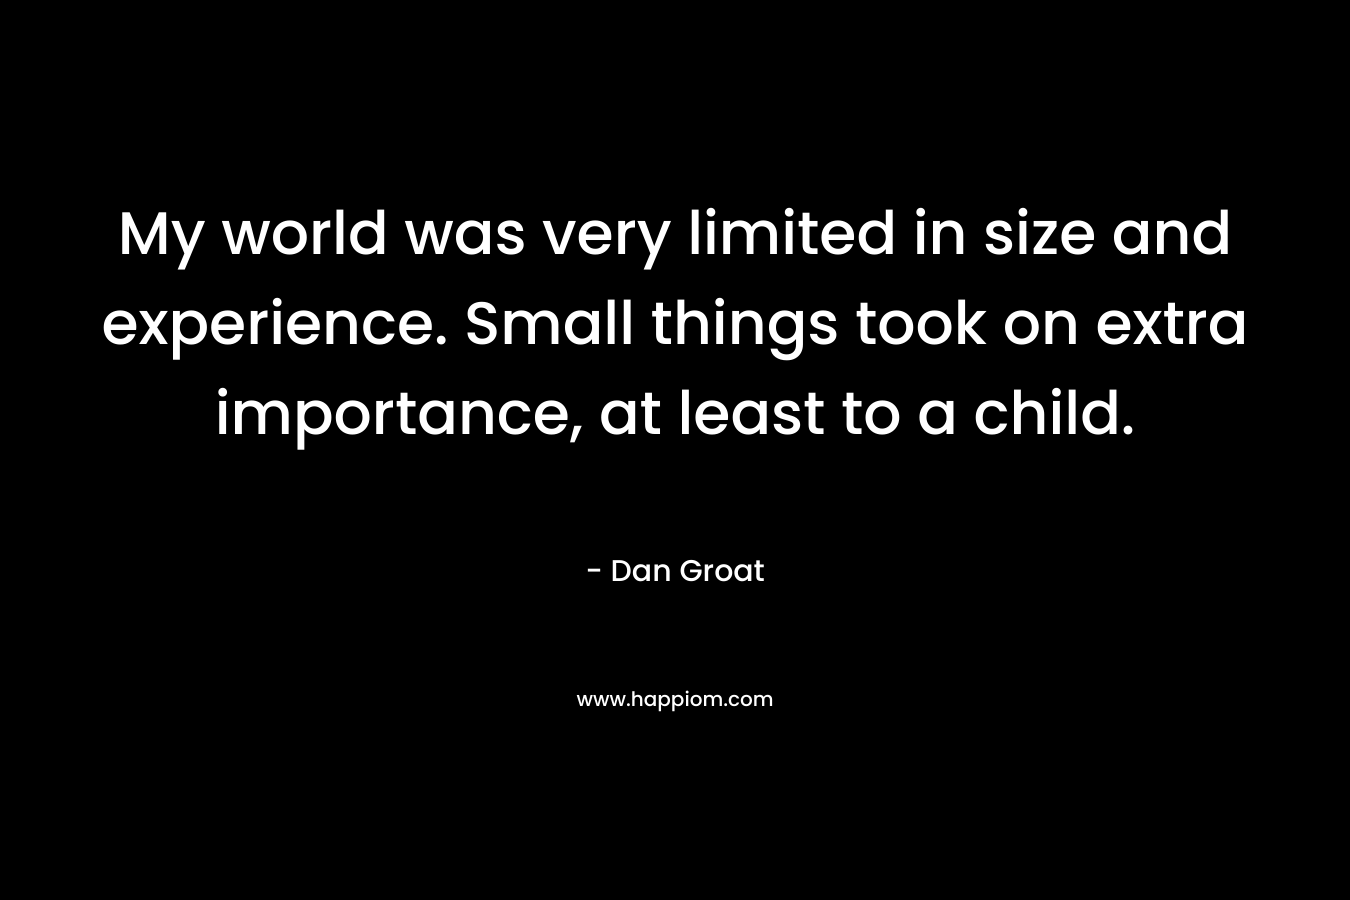 My world was very limited in size and experience. Small things took on extra importance, at least to a child.